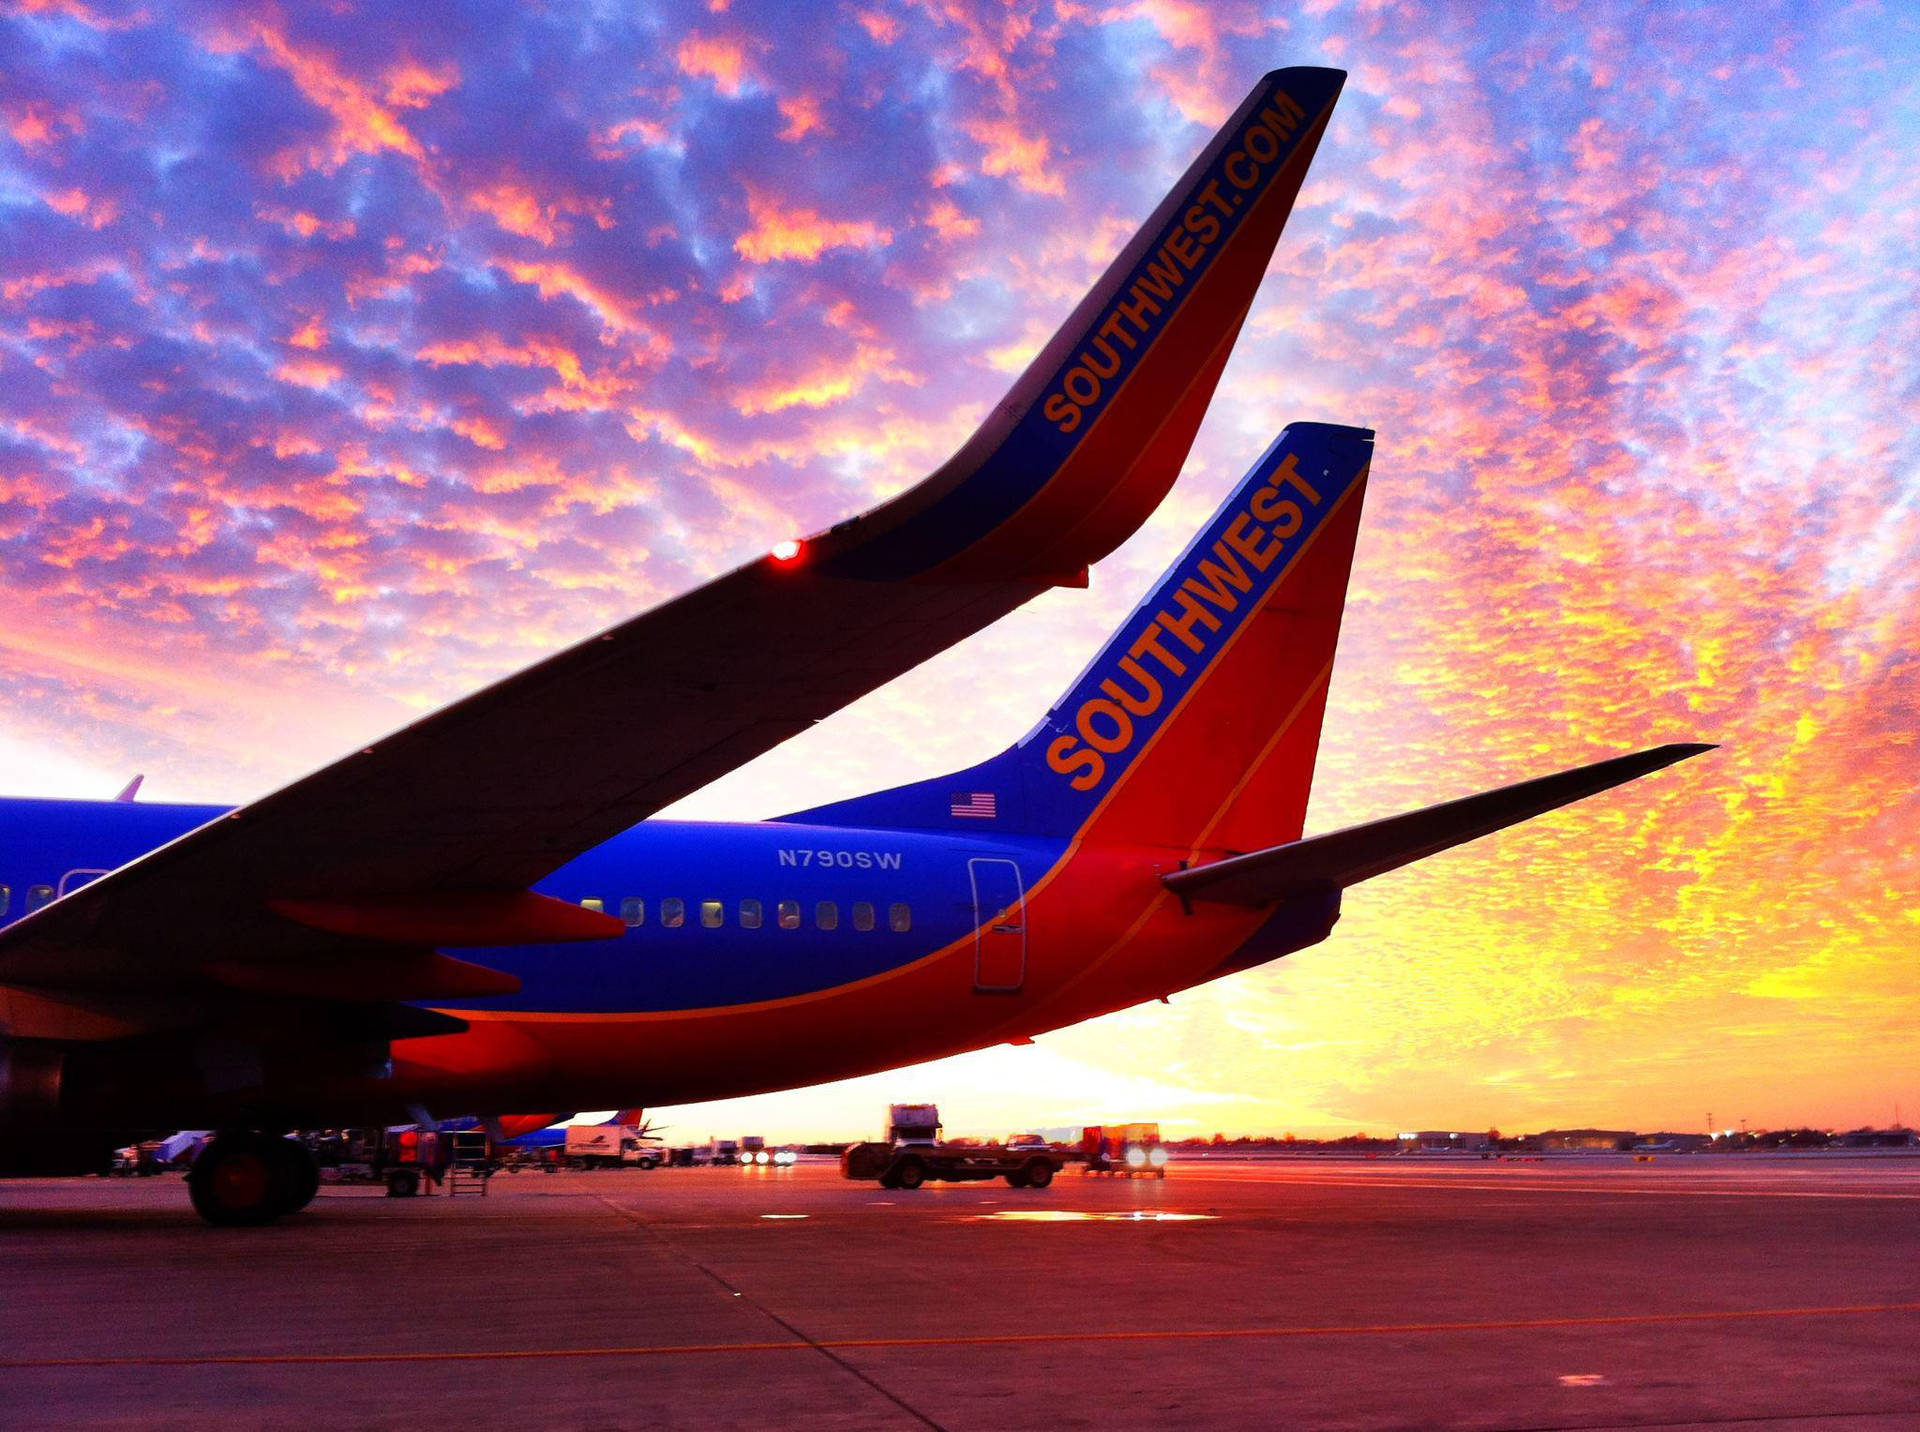 Sunset Airplane Southwest Airlines Wallpaper